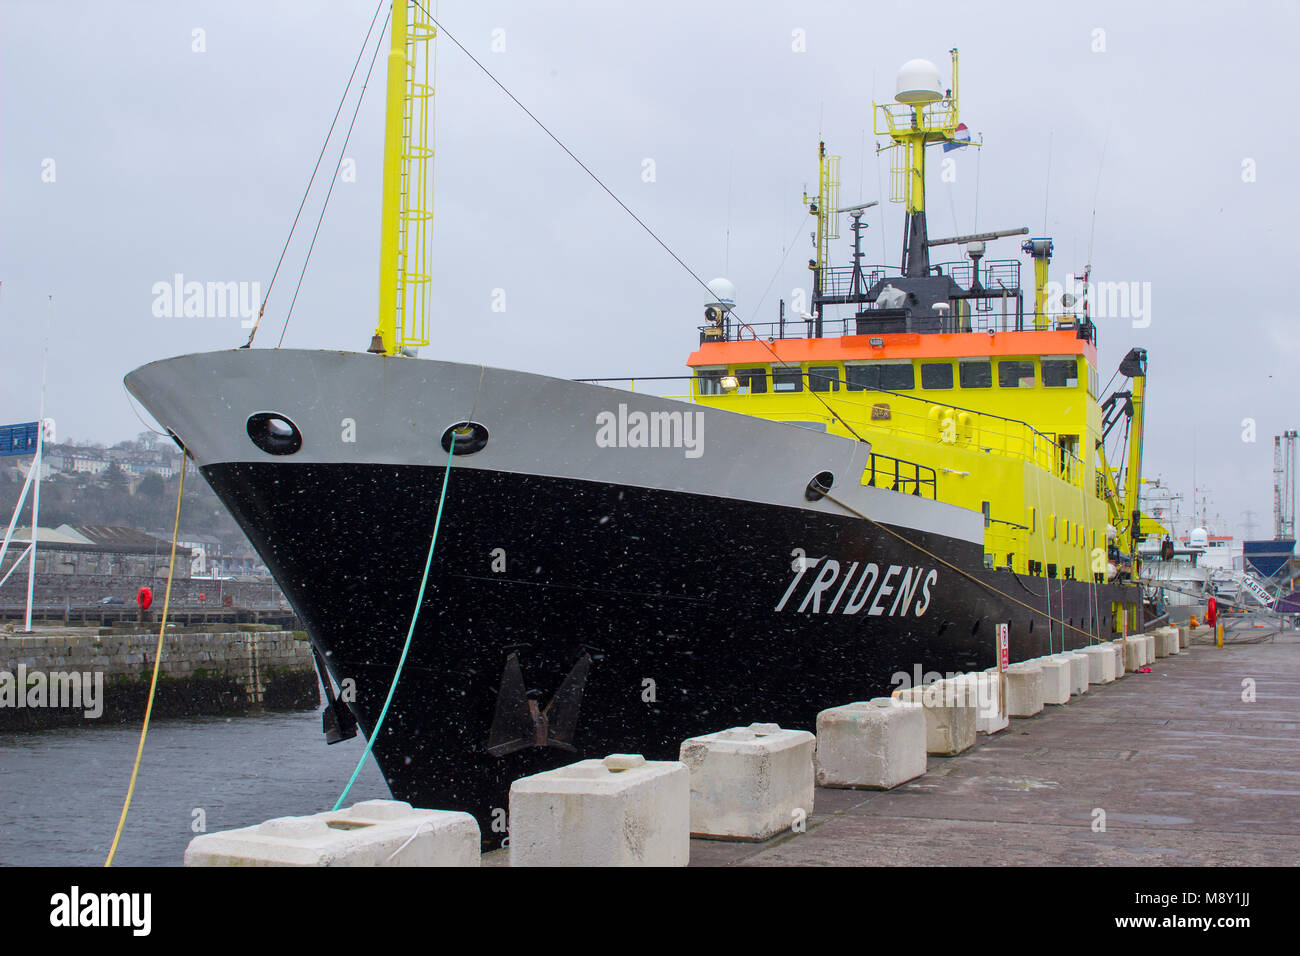 18 March 2018 The Dutch fisheries research vessel Tridens berthed at Kennedy Wharf in the city of Cork Harbour Ireland during a snow storm Stock Photo